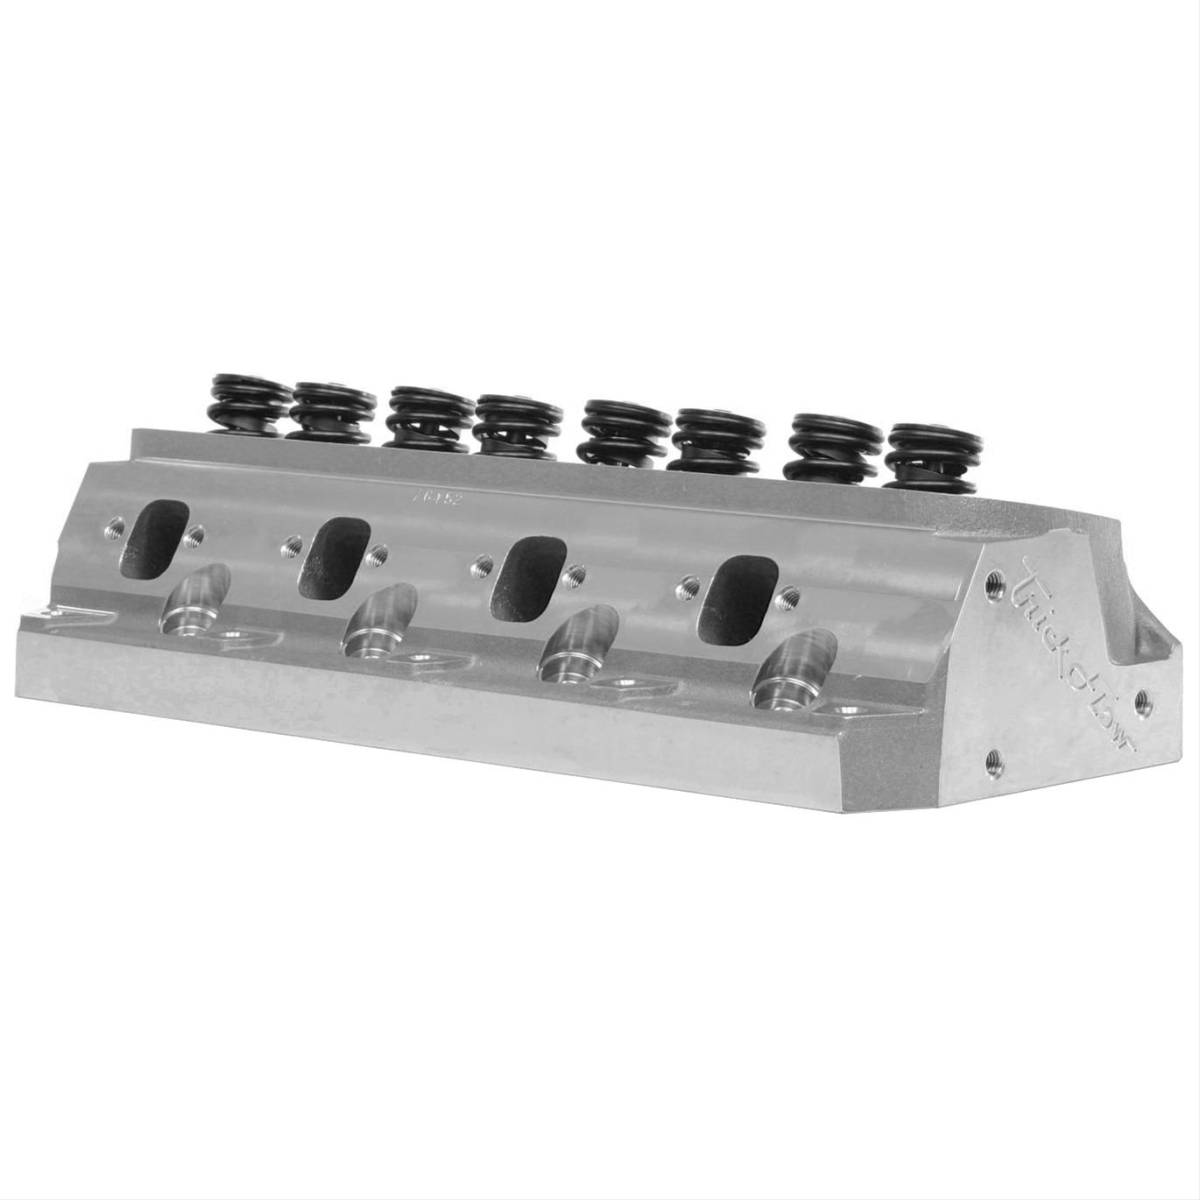 Trickflow - Trickflow Twisted Wedge Track Heat SBF 170cc Cylinder Heads Dual Valve 61cc Max Lift .600 - Image 1